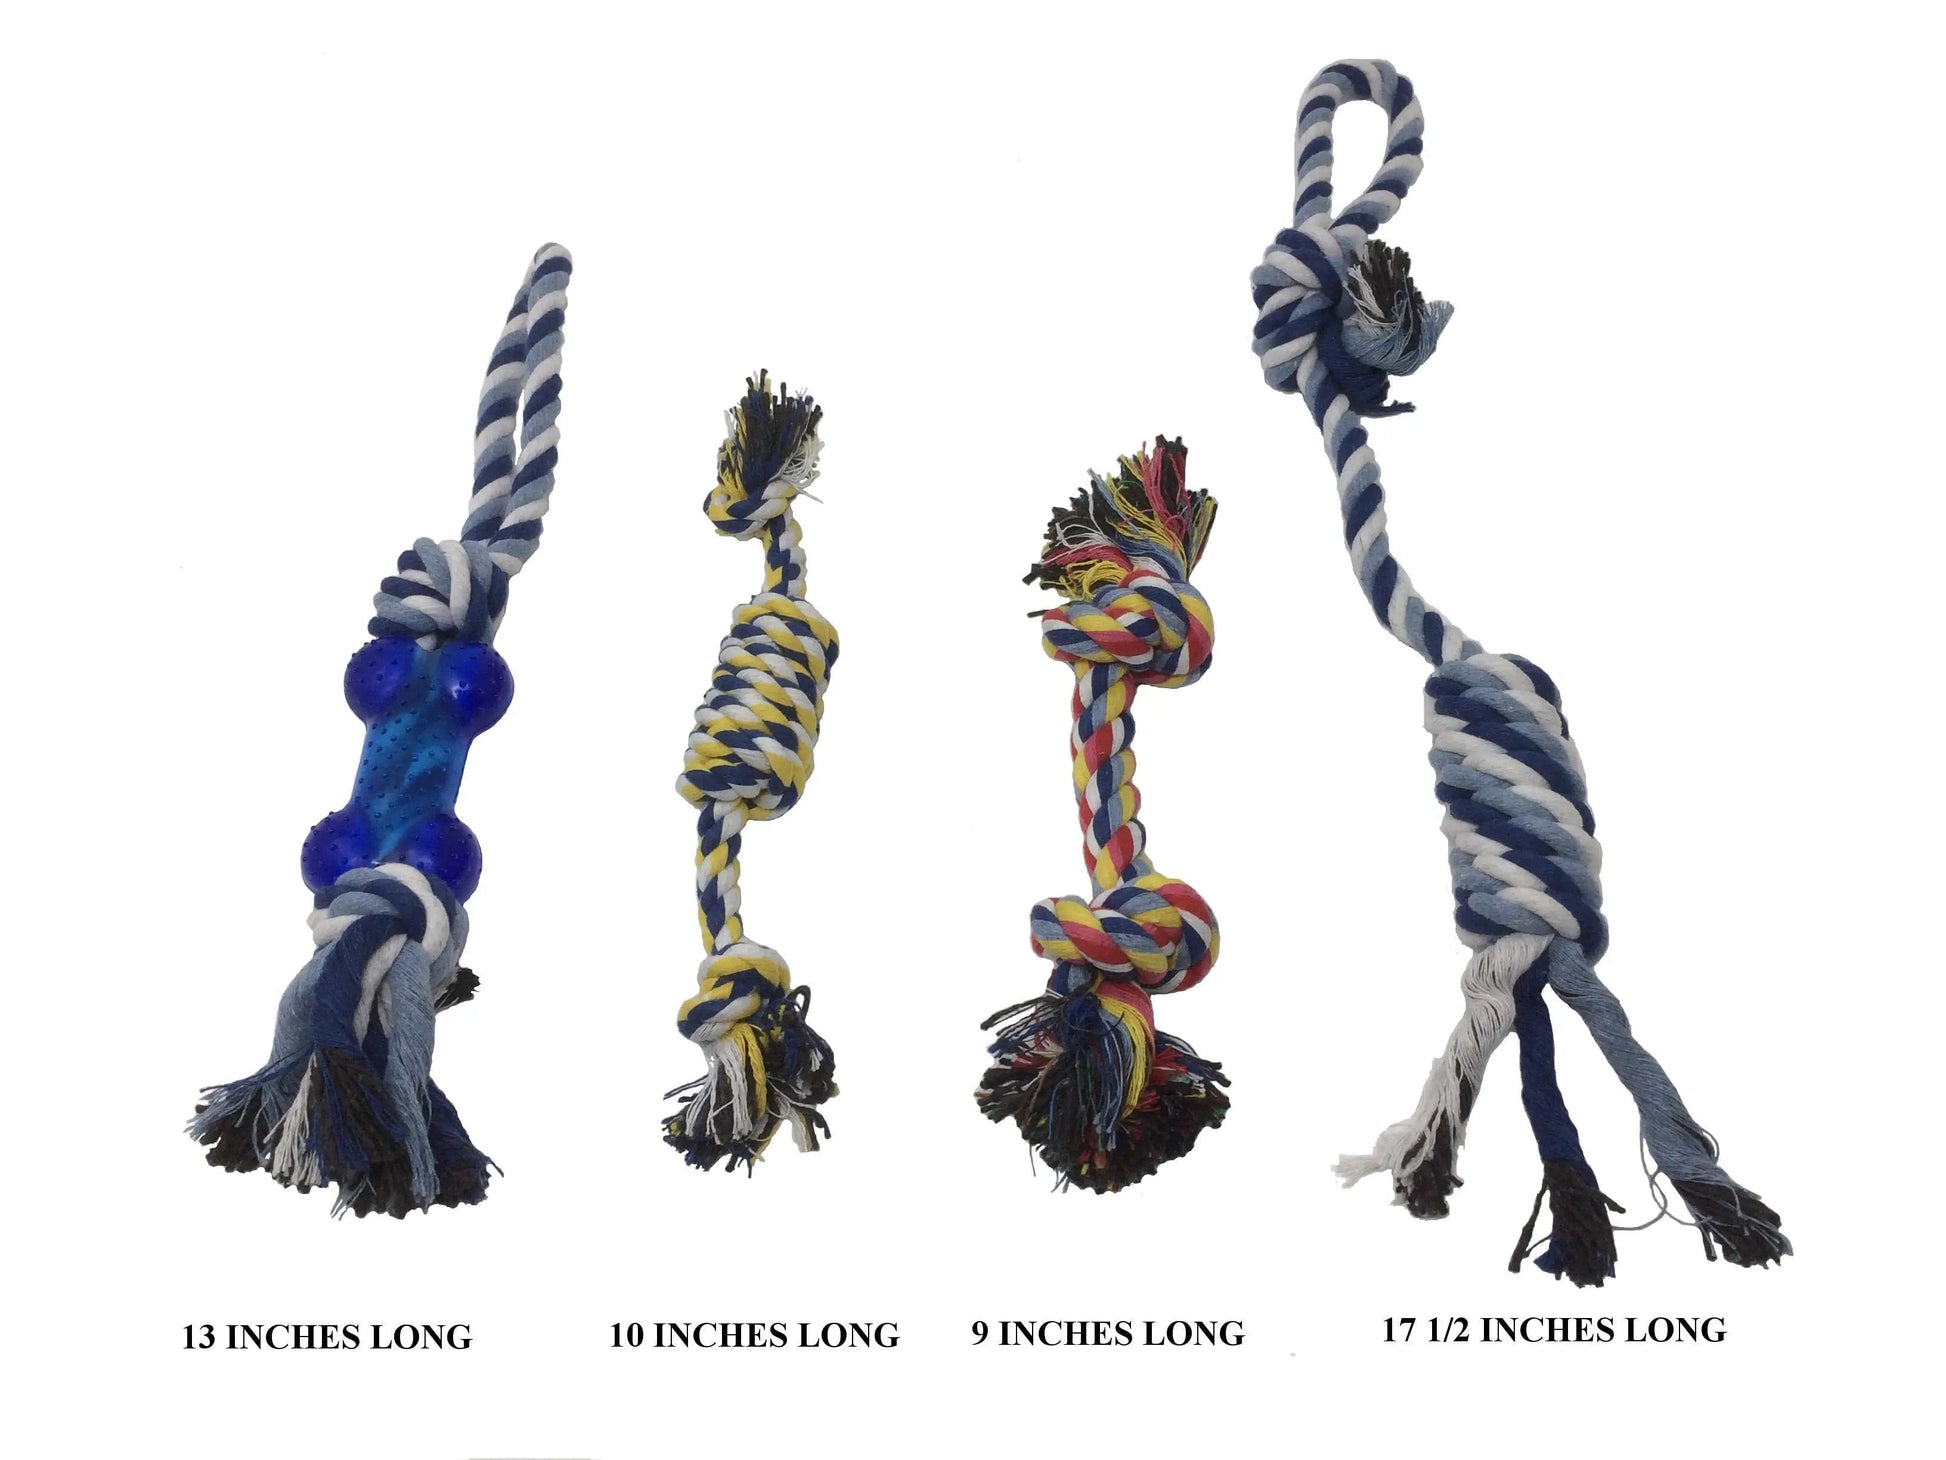 10pc Quality Dog Rope Toys | Small and Medium Size Dog | Storage Bag Included.